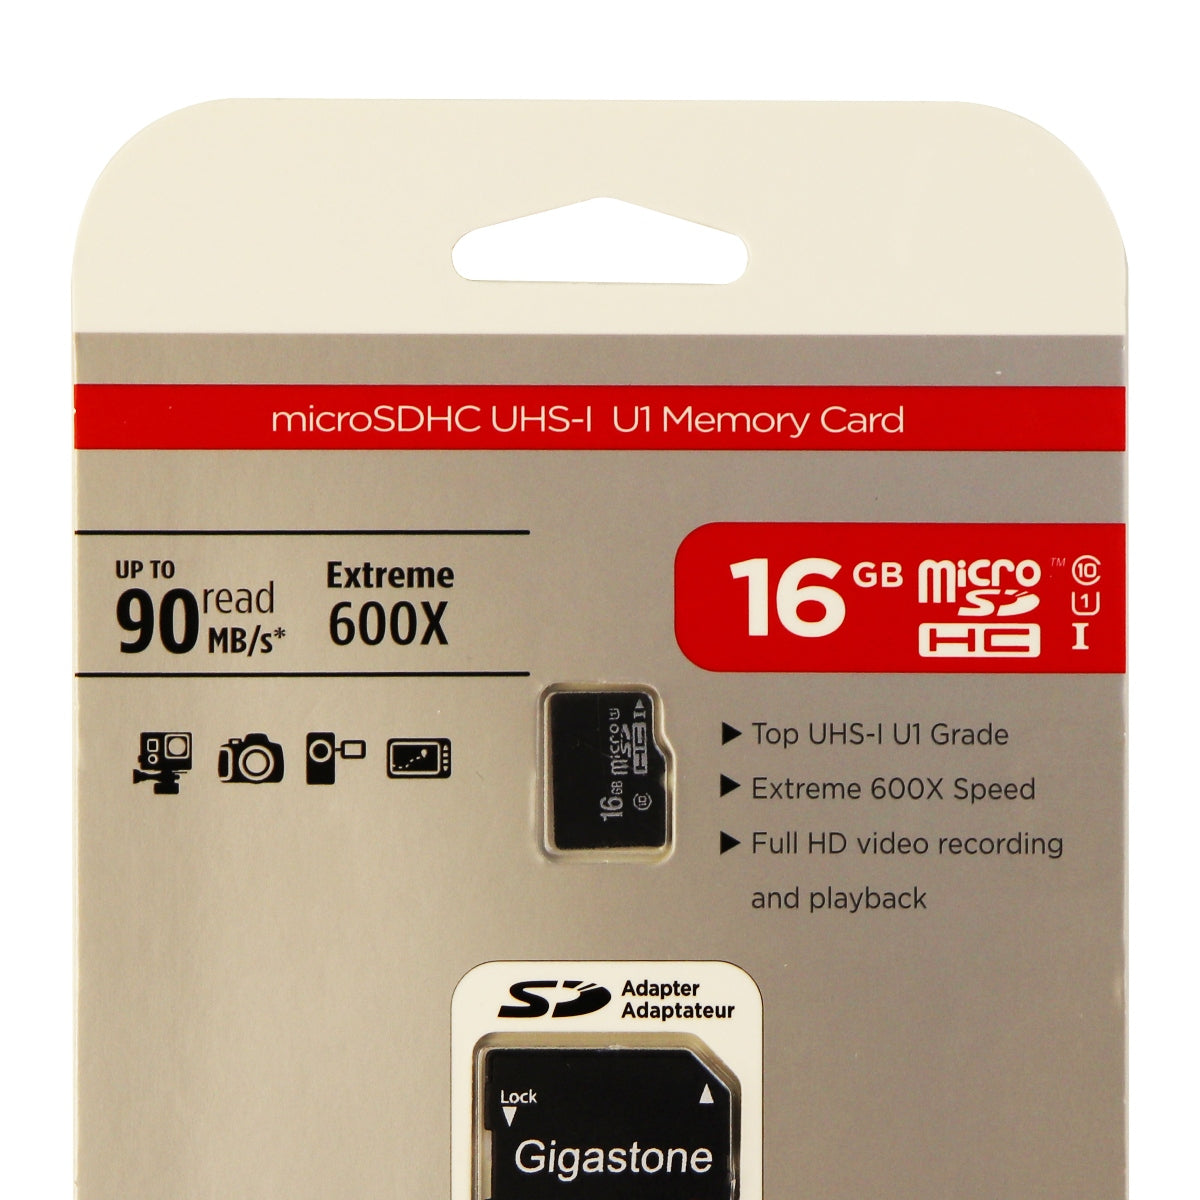 Gigastone MicroSDHC UHS-1 Class 10 (16GB) Memory Card and Adapter - Black Digital Camera - Memory Cards Gigastone    - Simple Cell Bulk Wholesale Pricing - USA Seller